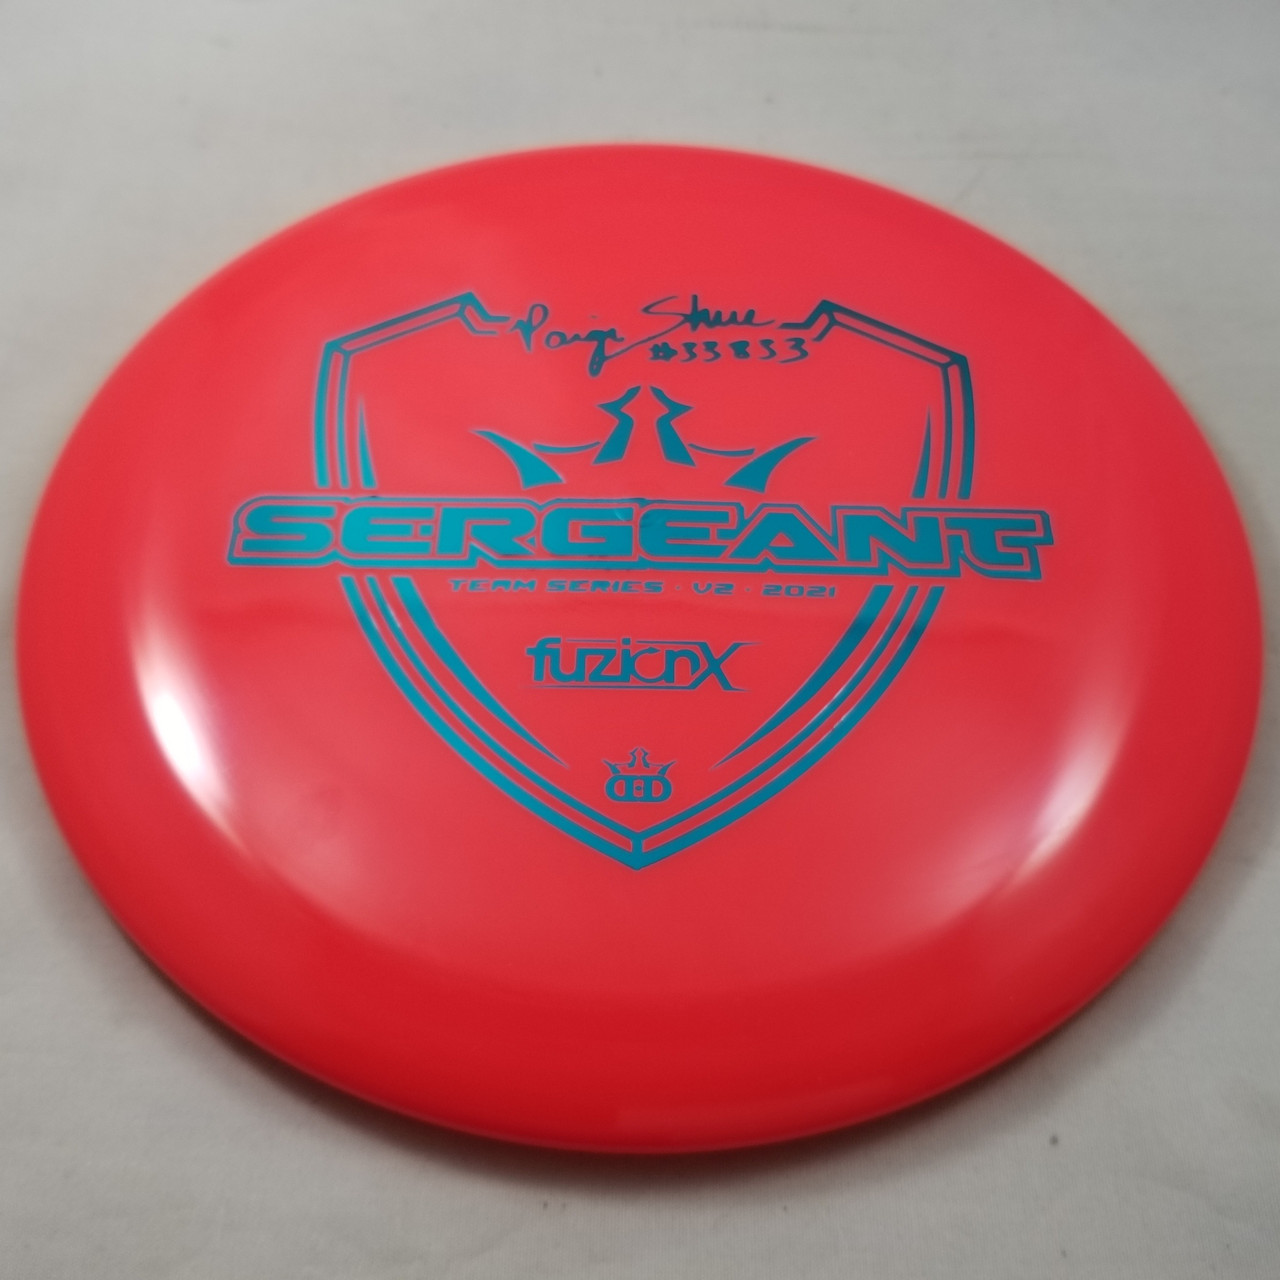 Dynamic Sergeant Fuzion-X Shue Red-Teal 175g